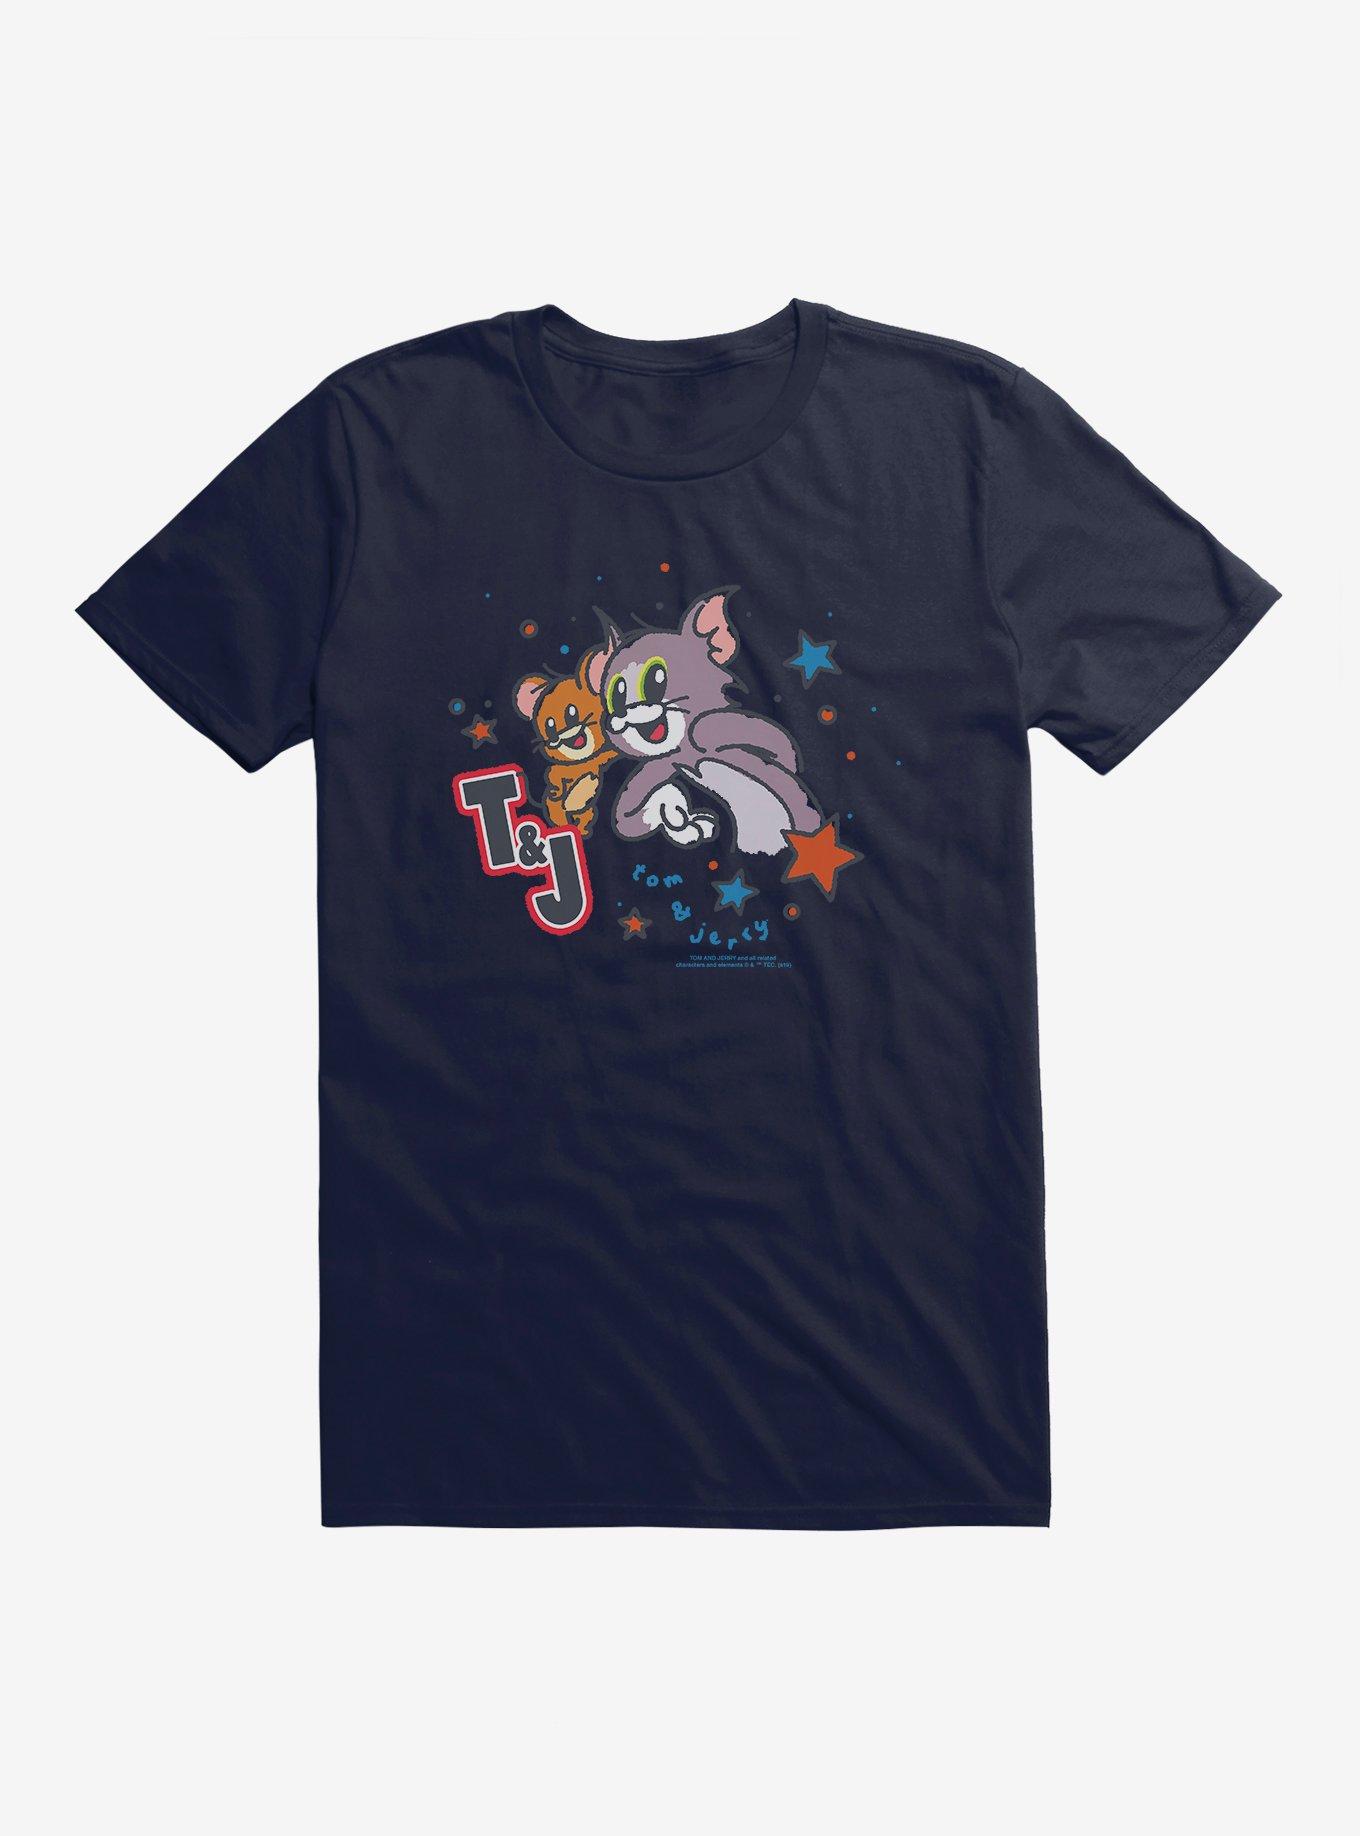 OFFICIAL Tom And Jerry T-Shirts and Merchandise | Hot Topic